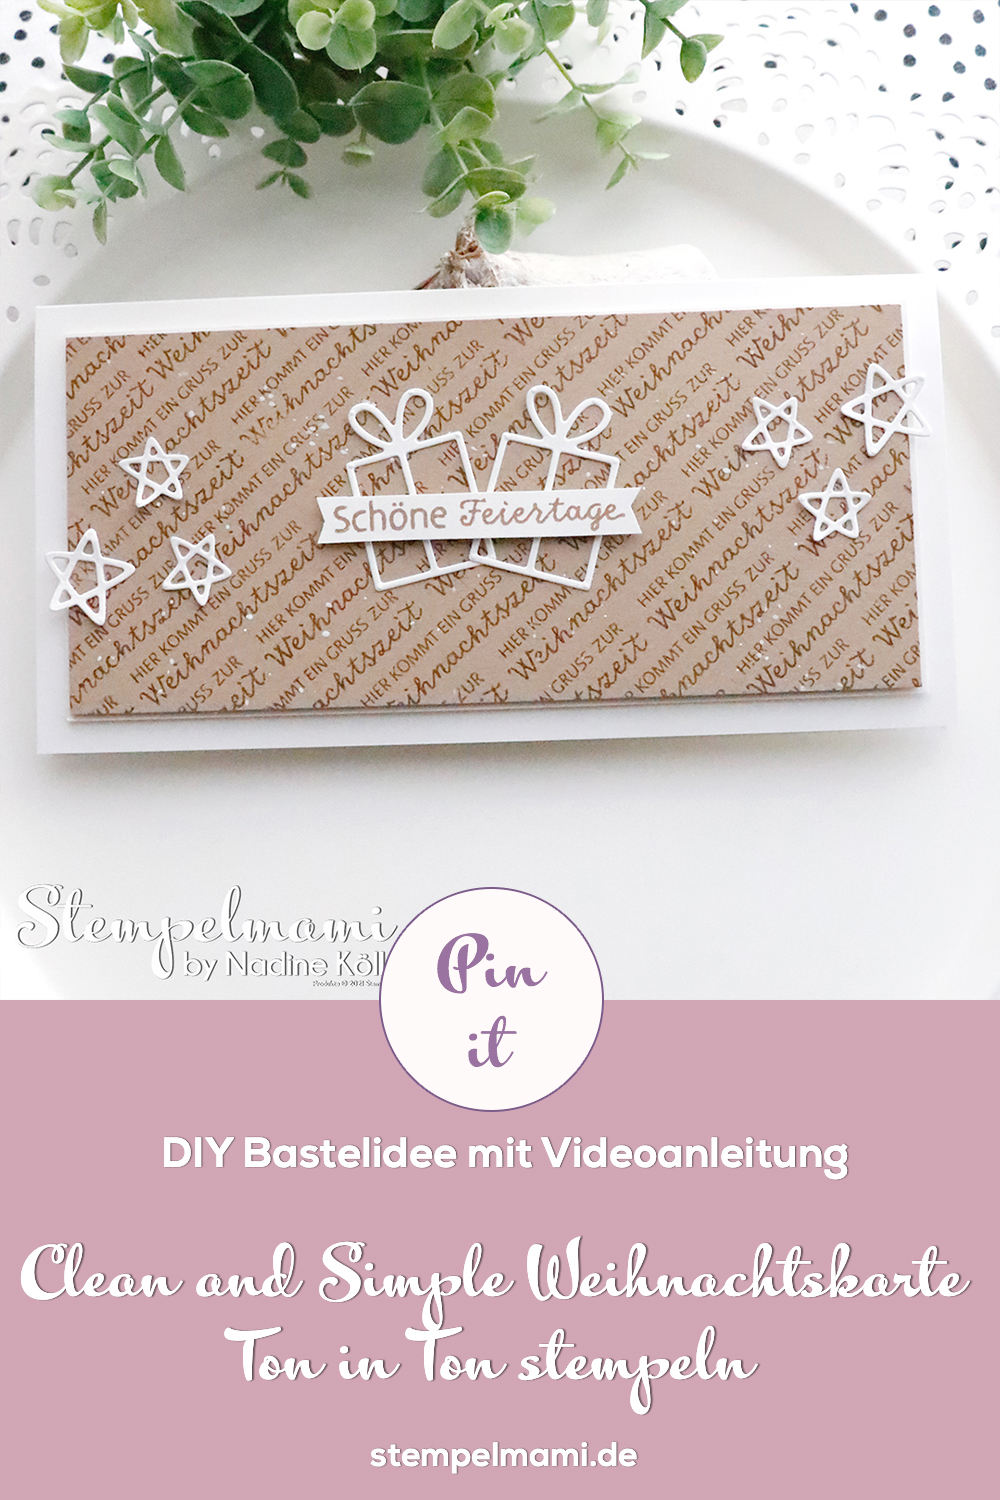 Stampin Up Video Anleitung Clean and Simple Weihnachtskarte Ton in Ton stempeln Stempelmami Youtube 2